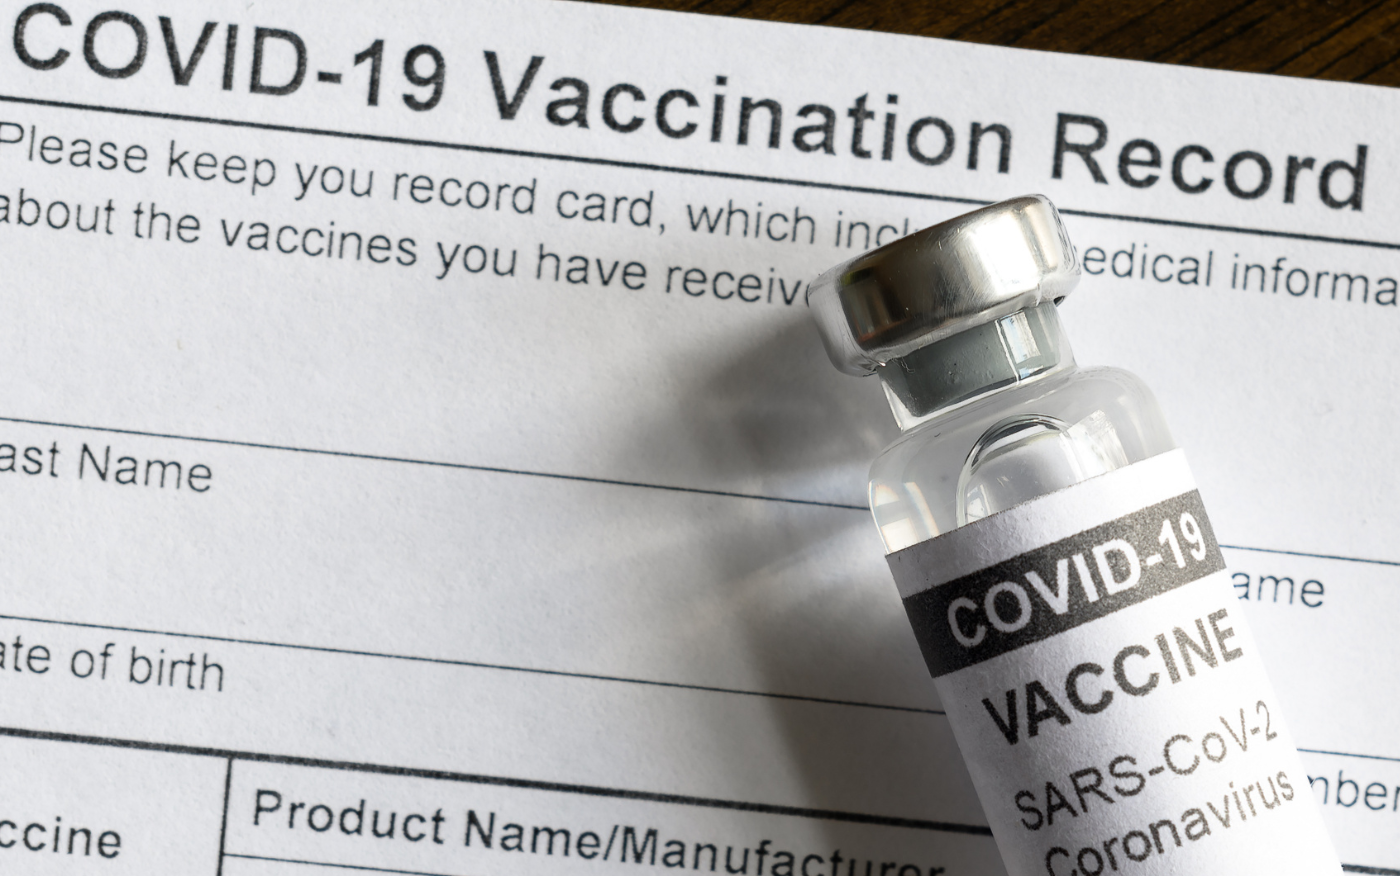 REPORT: Existing IP protection on COVID-19 vaccines contributed to global inequity, causing higher prices & supply delays